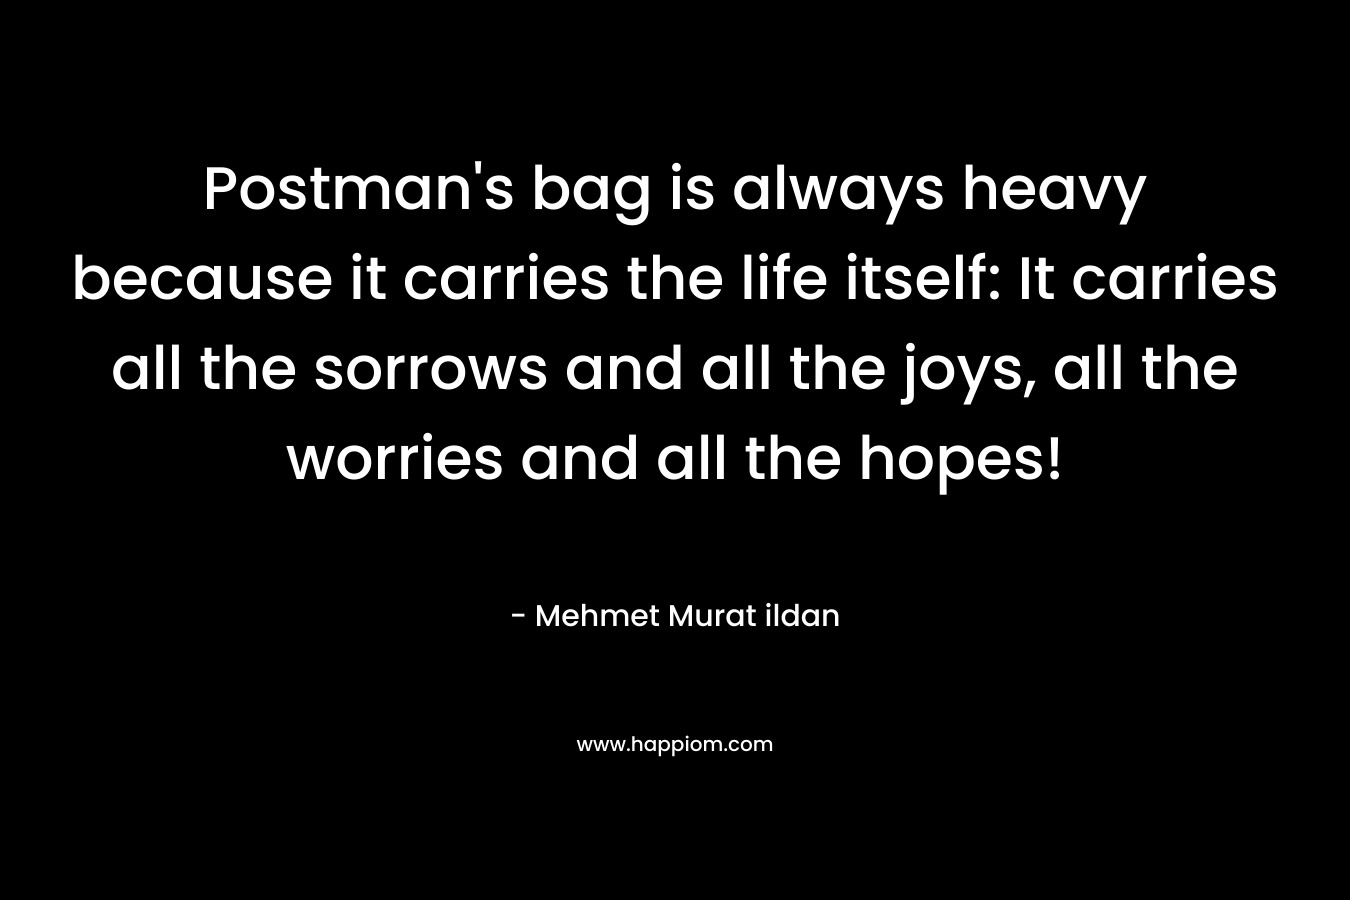 Postman’s bag is always heavy because it carries the life itself: It carries all the sorrows and all the joys, all the worries and all the hopes! – Mehmet Murat ildan